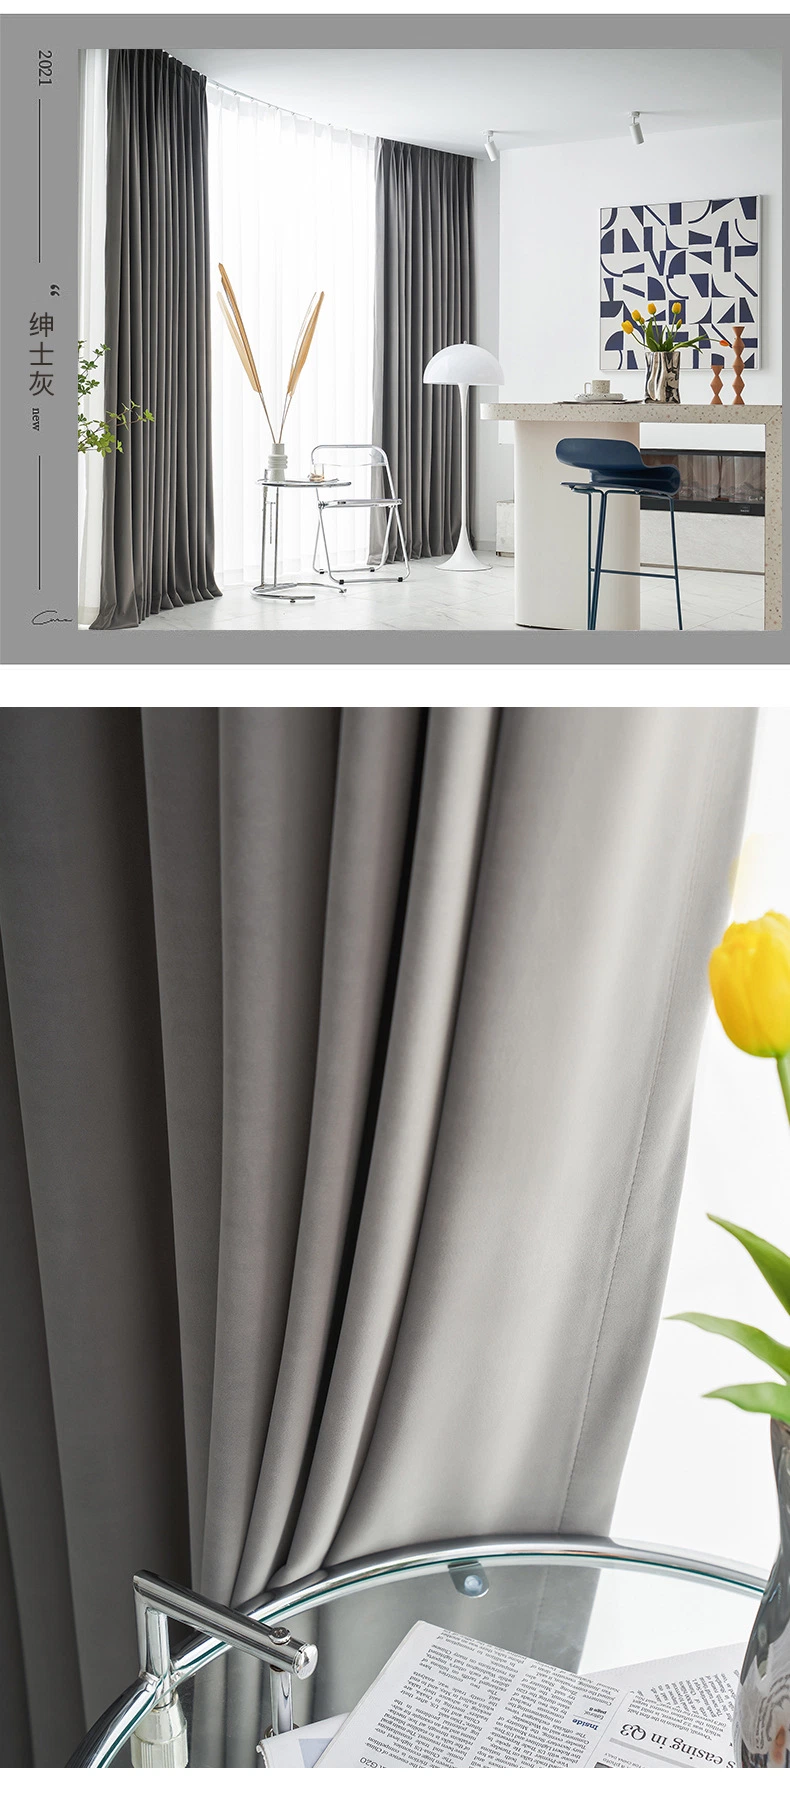 Wholesale Ready Made Quality Competitive Price 100% Polyester Fabric Light Luxury Curtins Netherlands Velvet Curtains Waterproof and Dust Proof